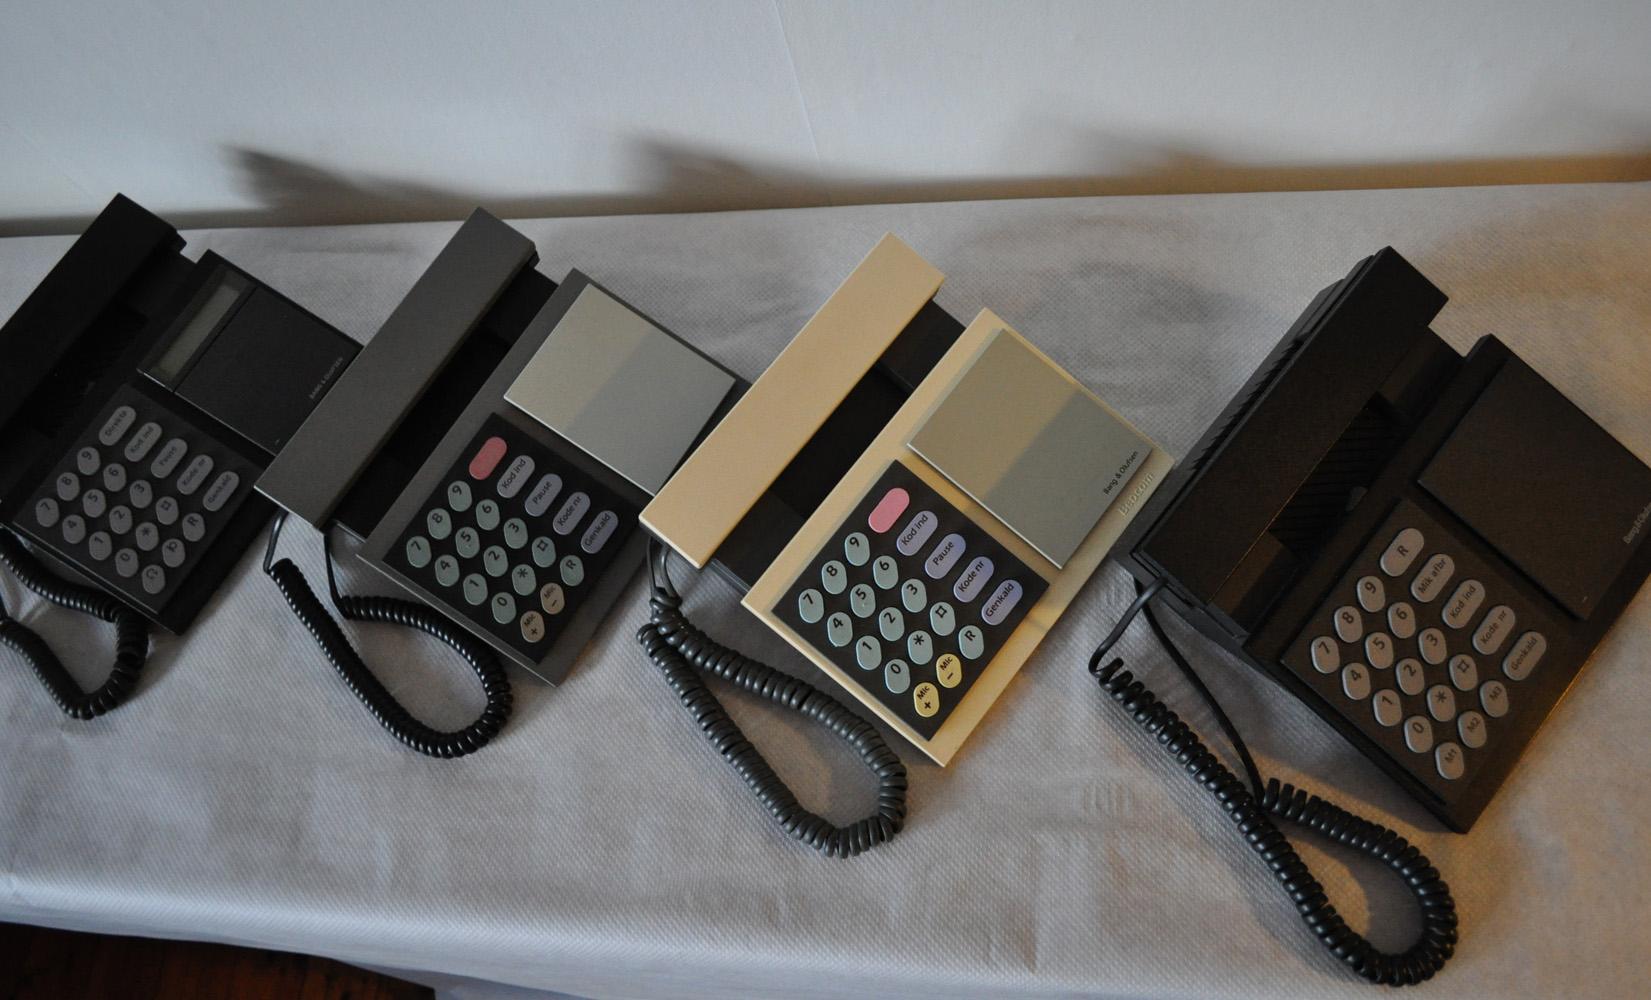 Scandinavian Modern Iconic Beocom 1000 Telephone from 1986 by Bang & Olusfen